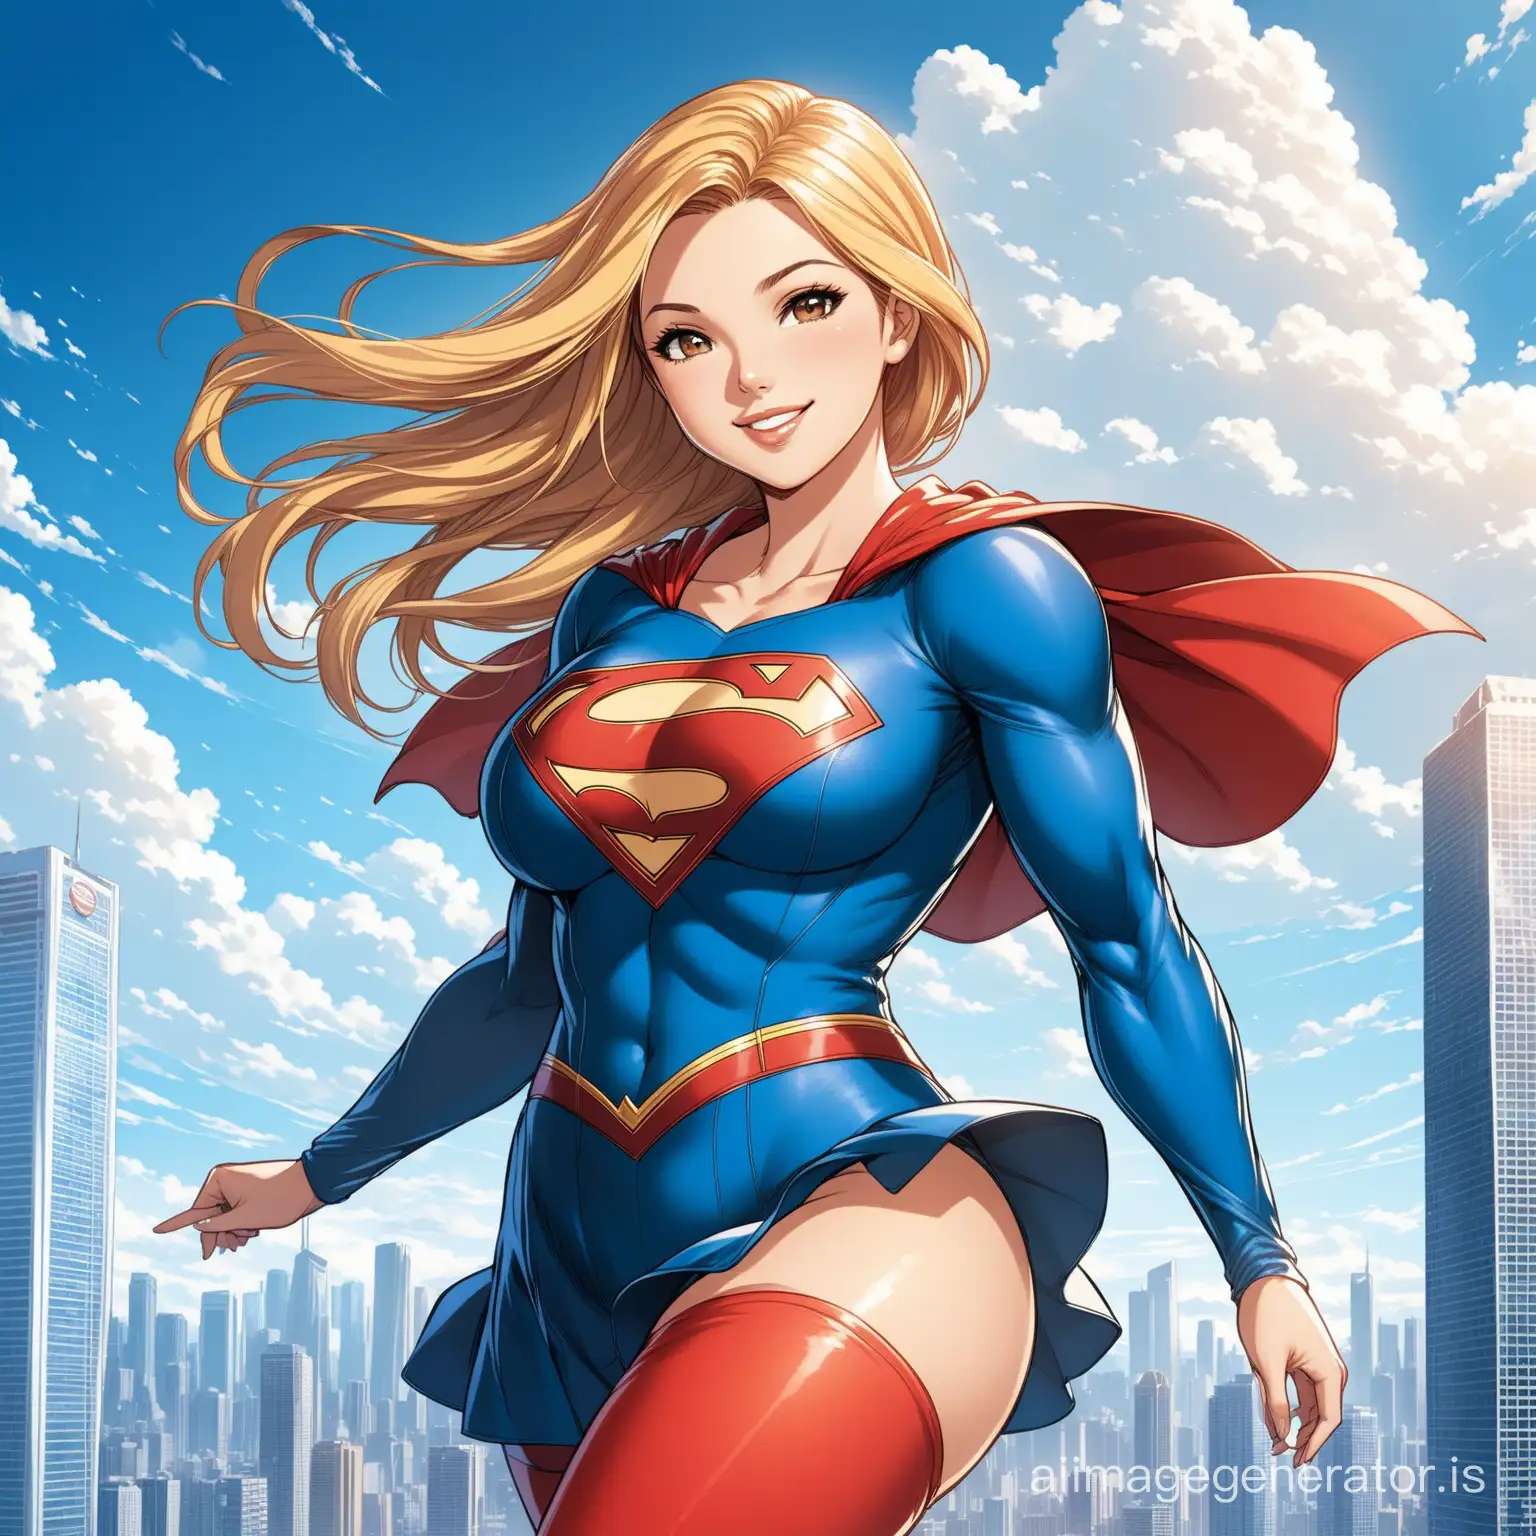 Joyful-Supergirl-in-Modern-DC-Comics-Style-with-Colombian-Actress-Marcela-Mars-Likeness